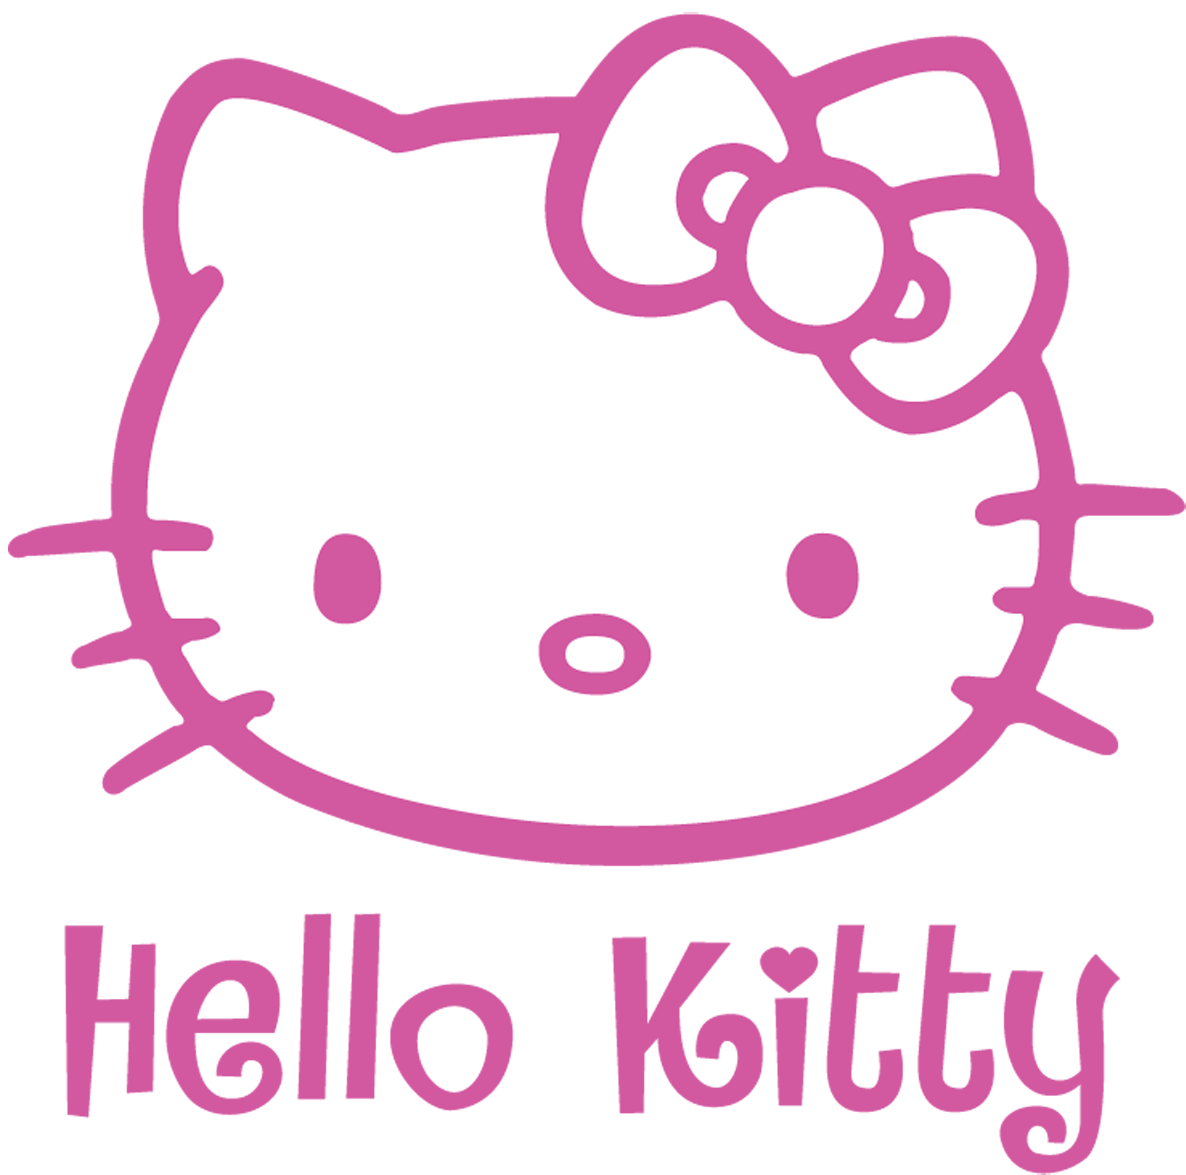 Hellokitty Wallpaper Clipart Image Gallery For